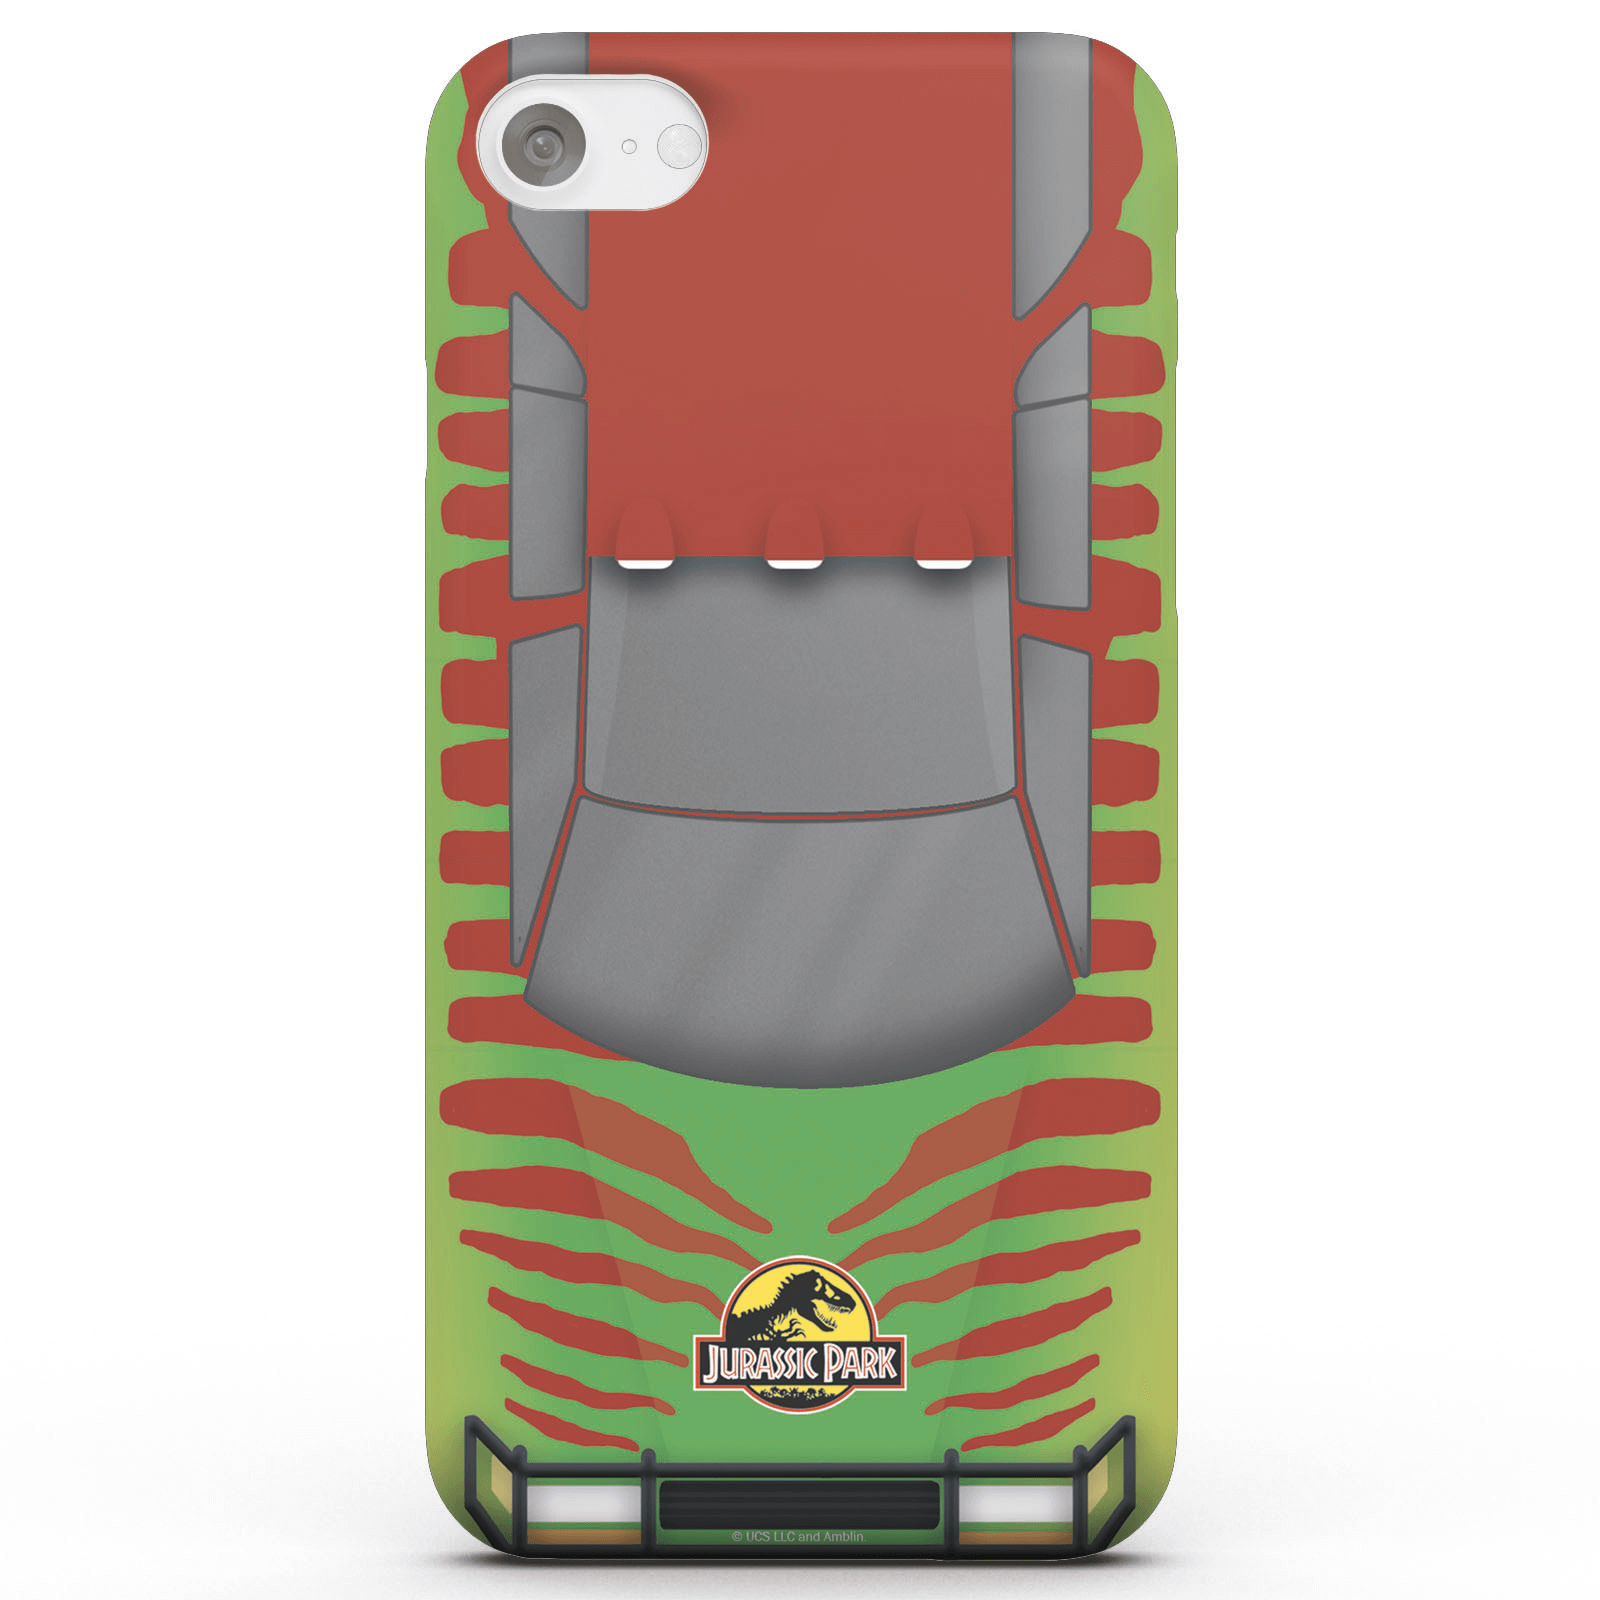 Jurassic Park Tour Car Phone Case for iPhone and Android - iPhone 5/5s - Snap Case - Matte